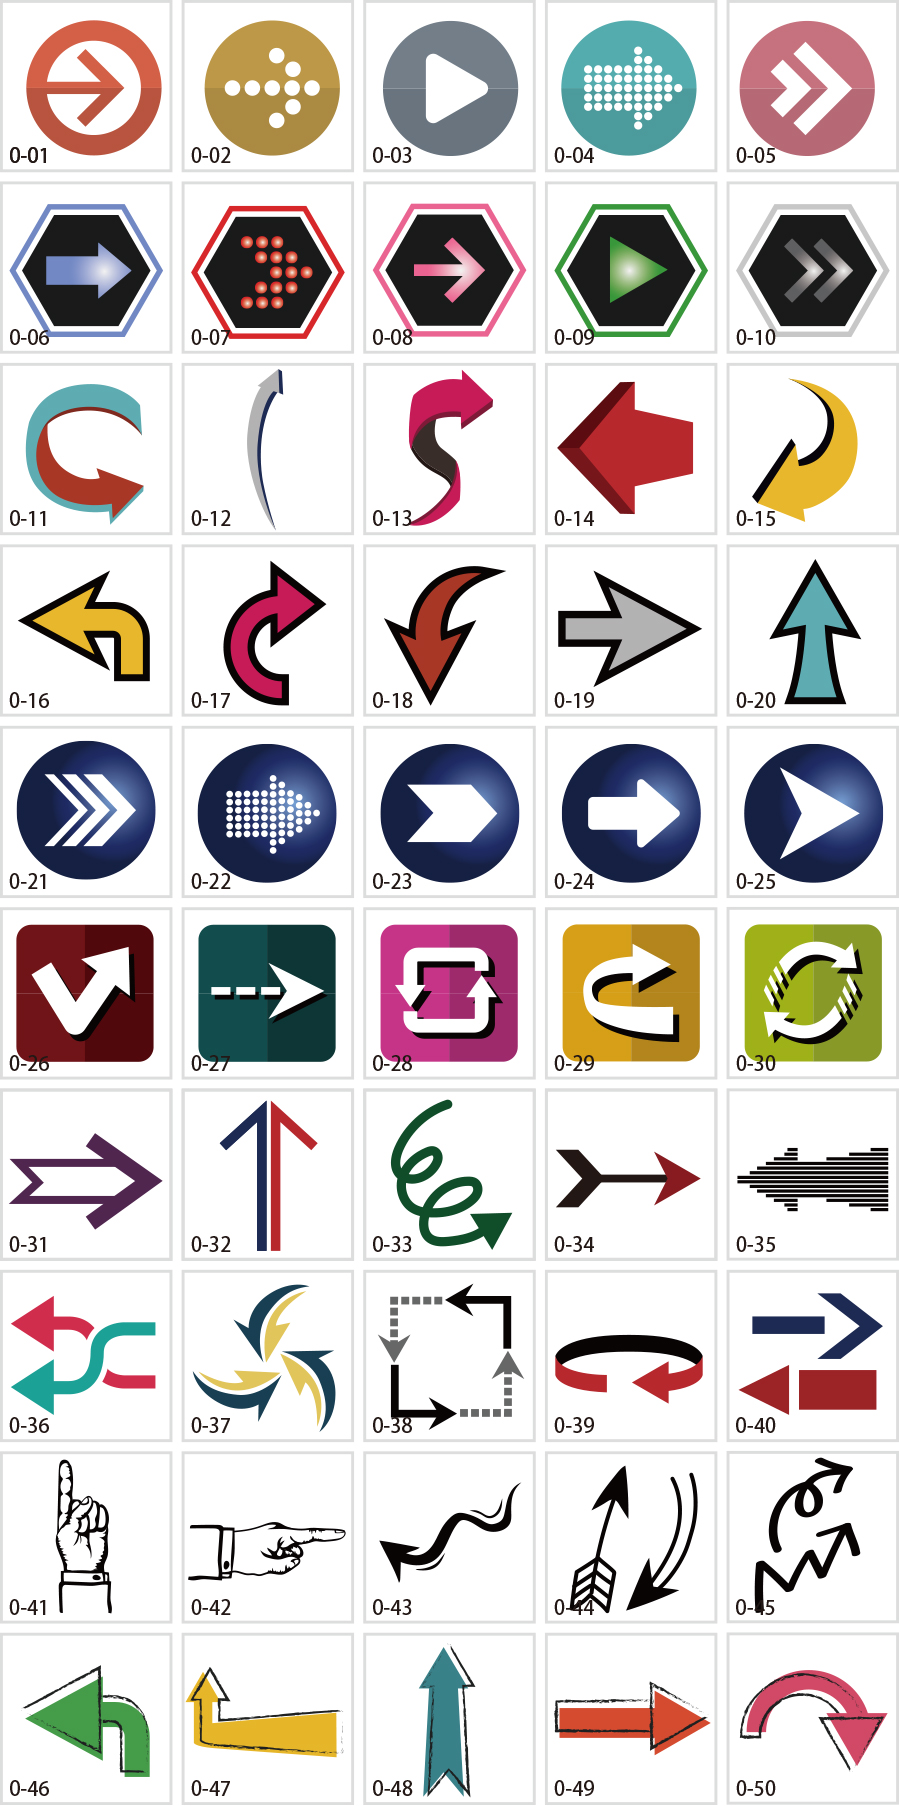 Illustration material of various arrows